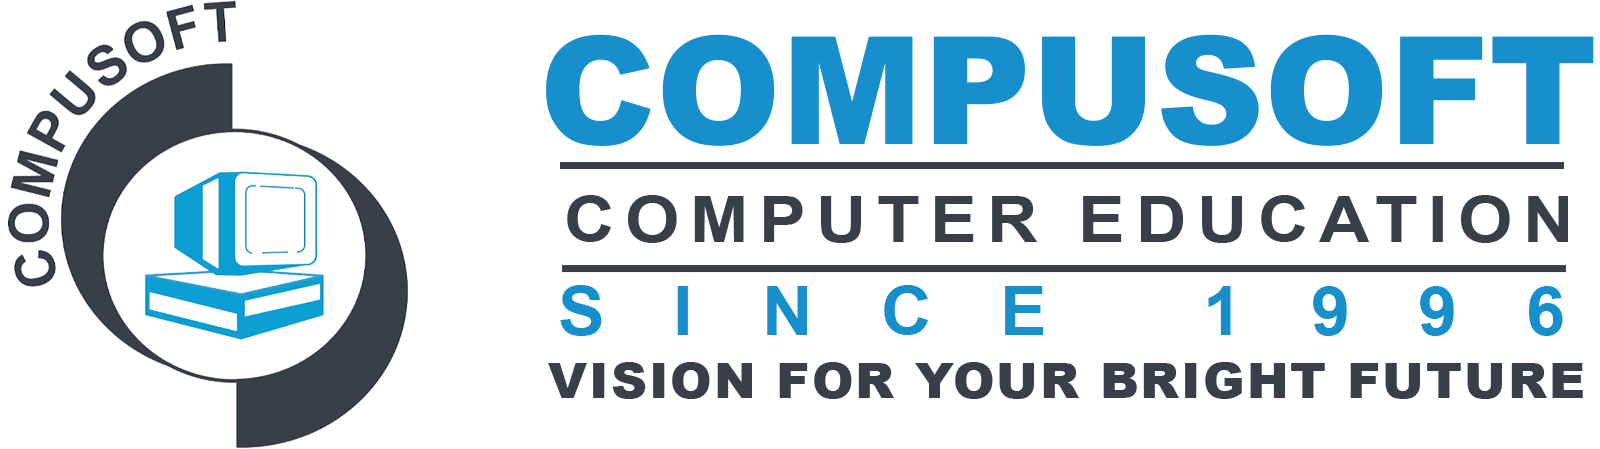 About Compusoft | Know about Compusoft Services | Know about Compusoft Course